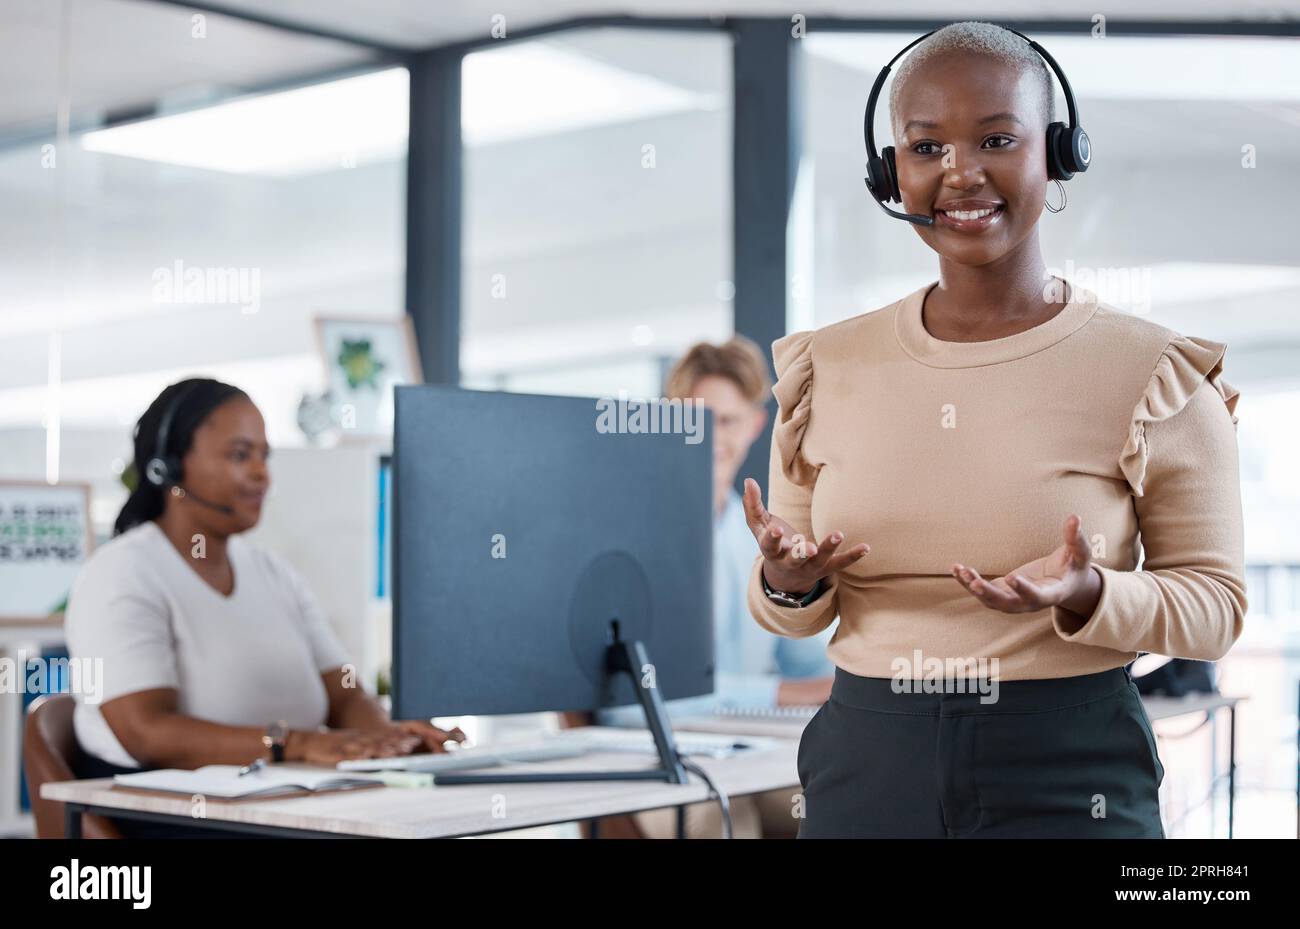 Crm, woman and customer support contact us consultant talking on a customer phone consultation. Happy internet call center employee with headset working and giving digital consulting help advice Stock Photo